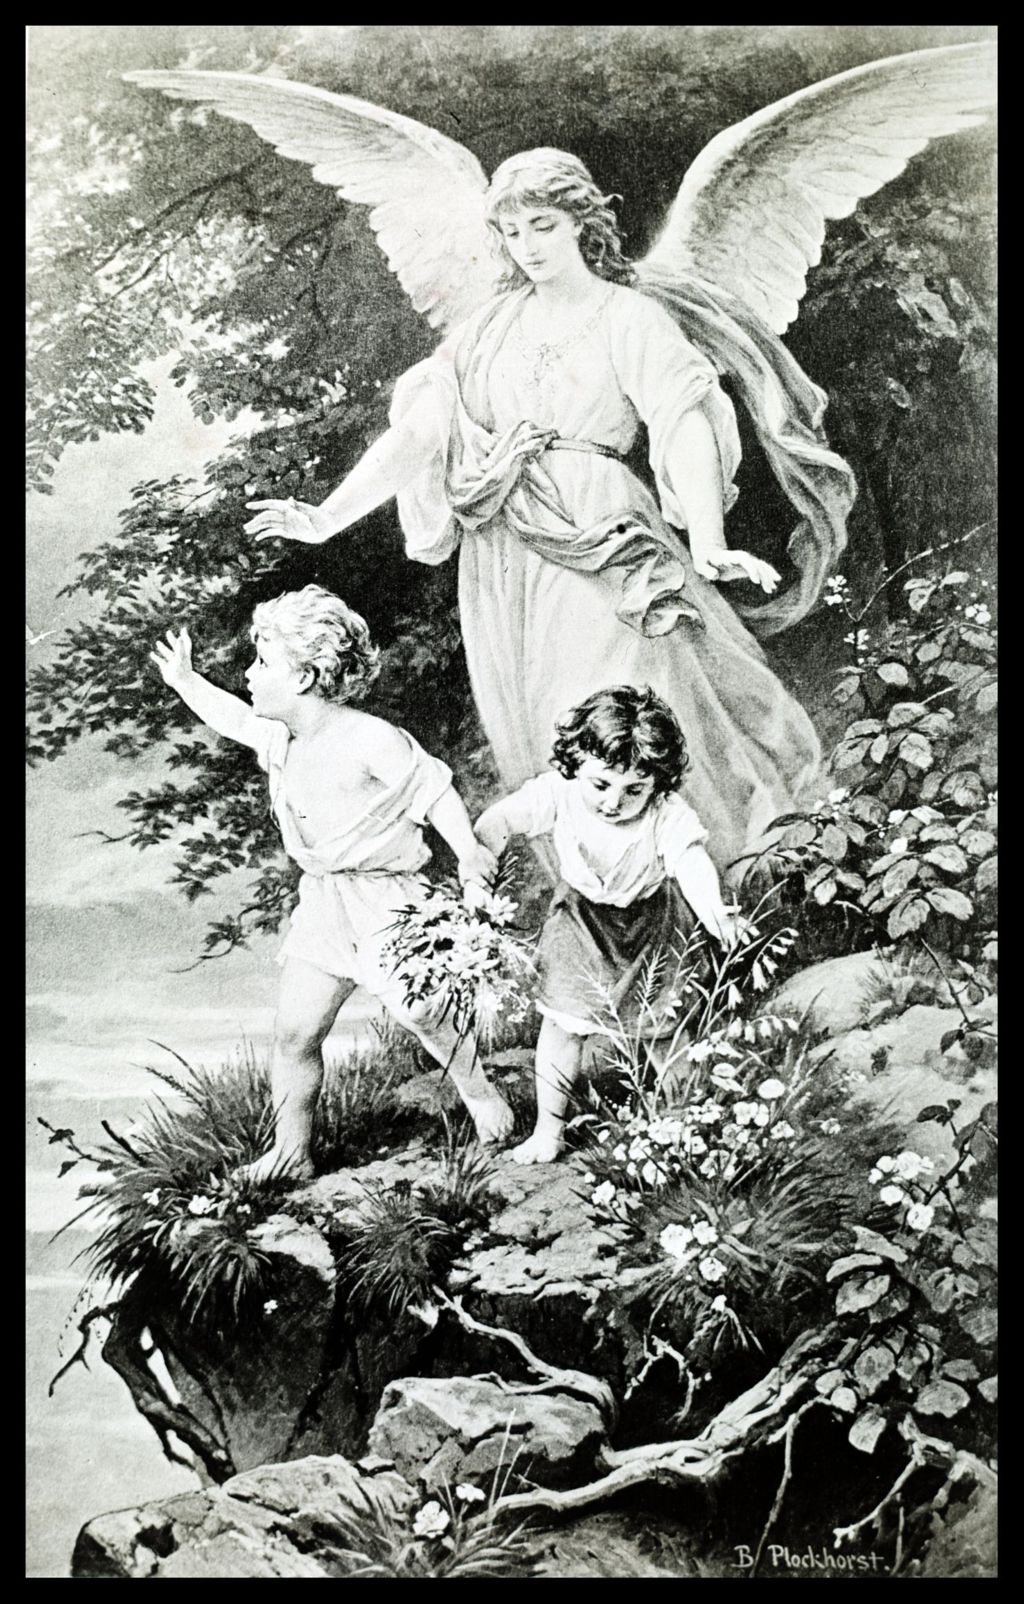 An angel looking over two small children playing near the edge of a cliff